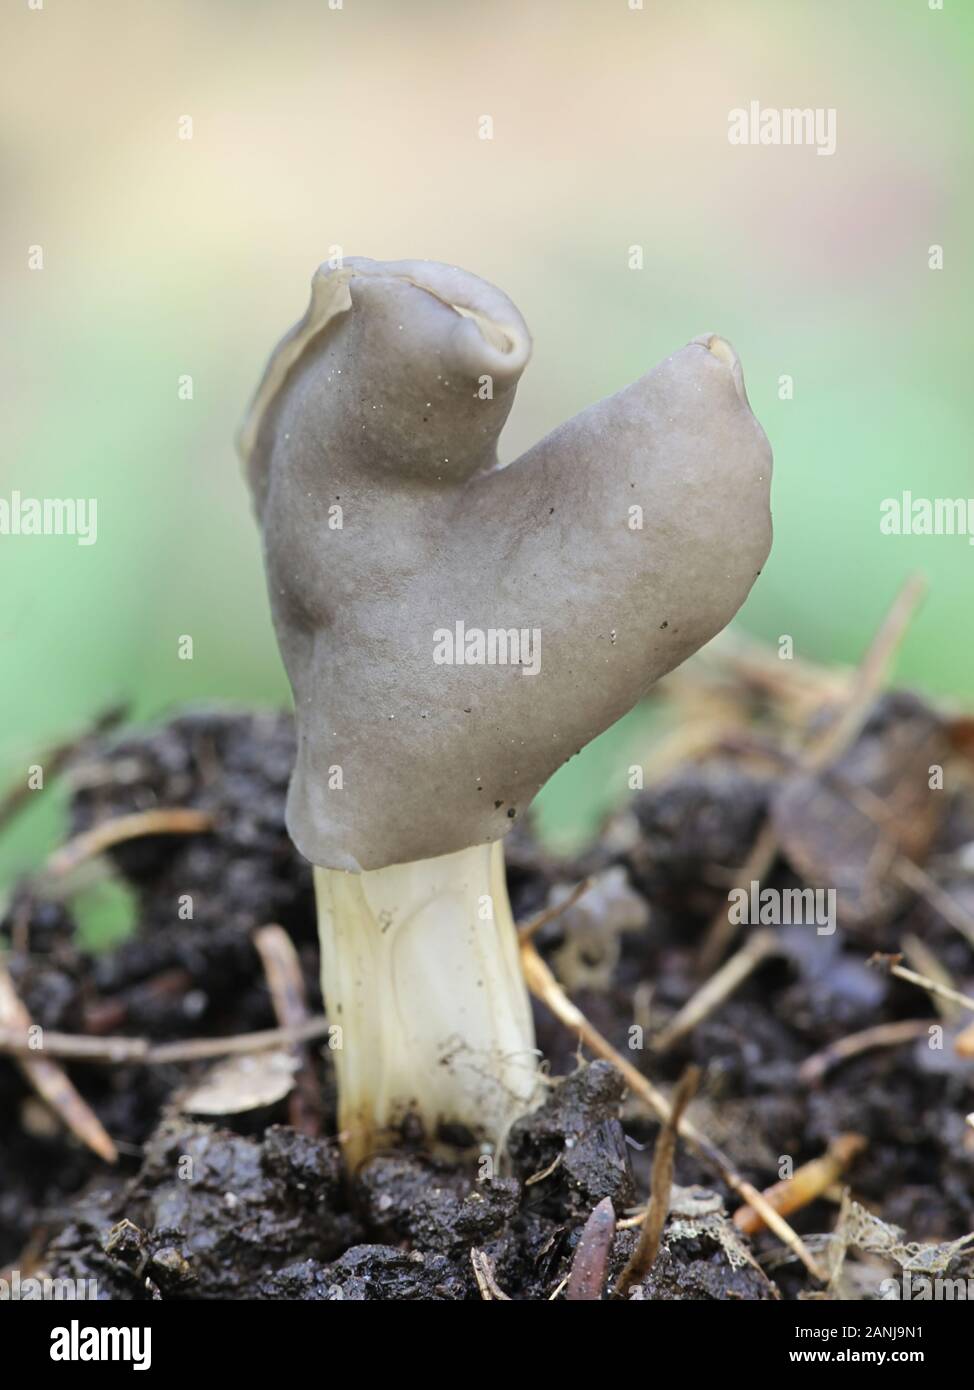 Helvella lacunosa, known as the slate grey saddle or fluted black elfin saddle, wild mushrooms from Finland Stock Photo